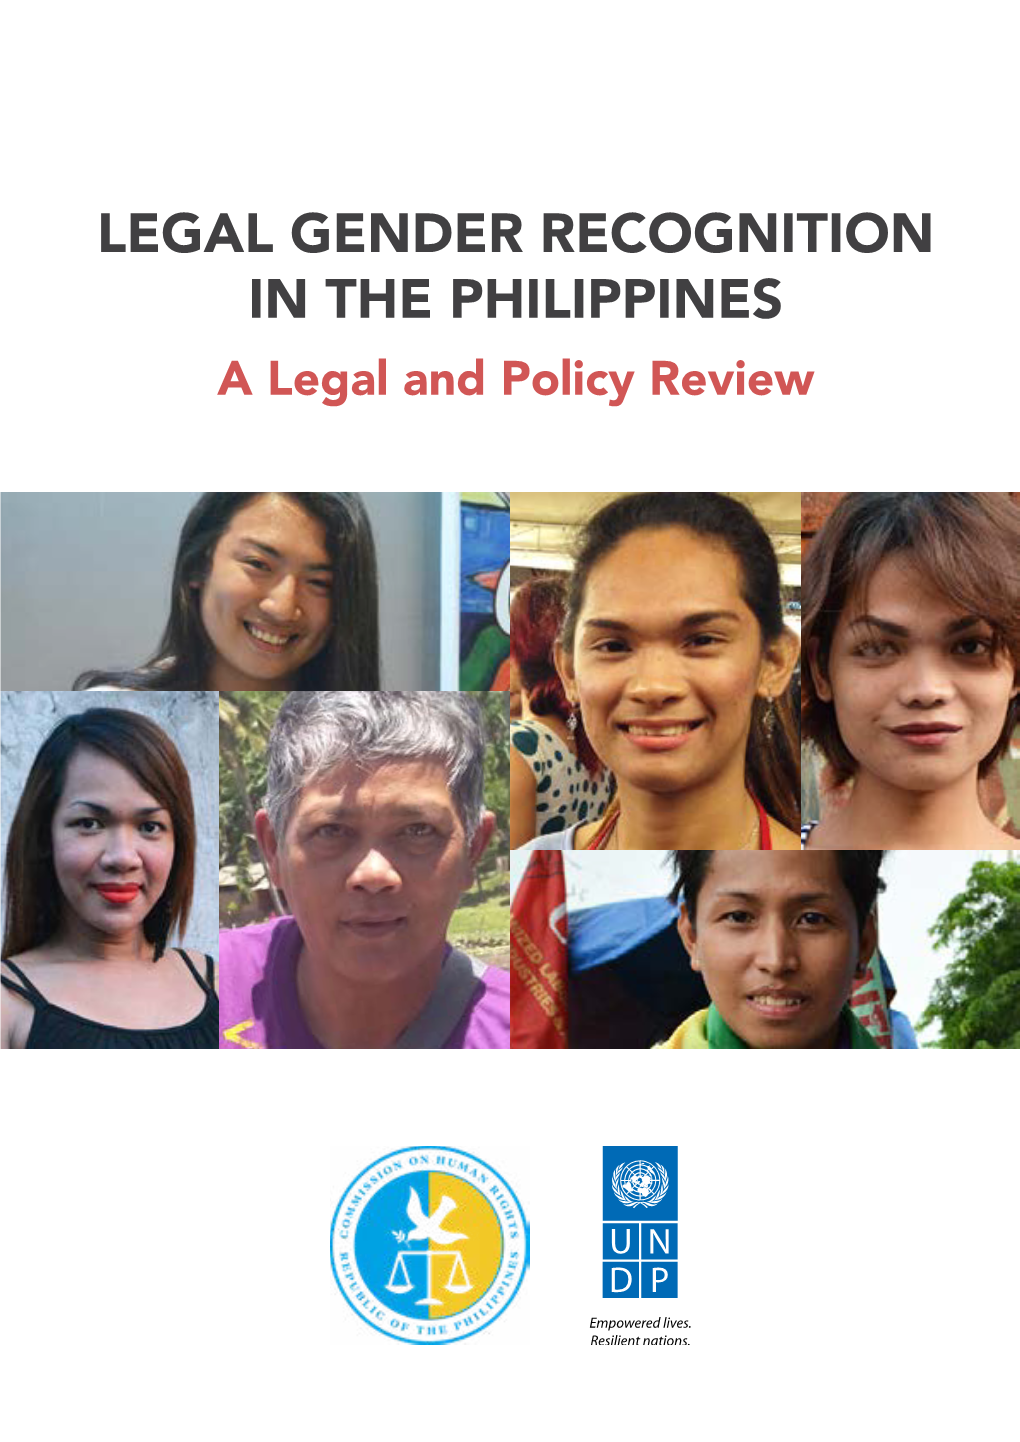 LEGAL GENDER RECOGNITION in the PHILIPPINES a Legal and Policy Review